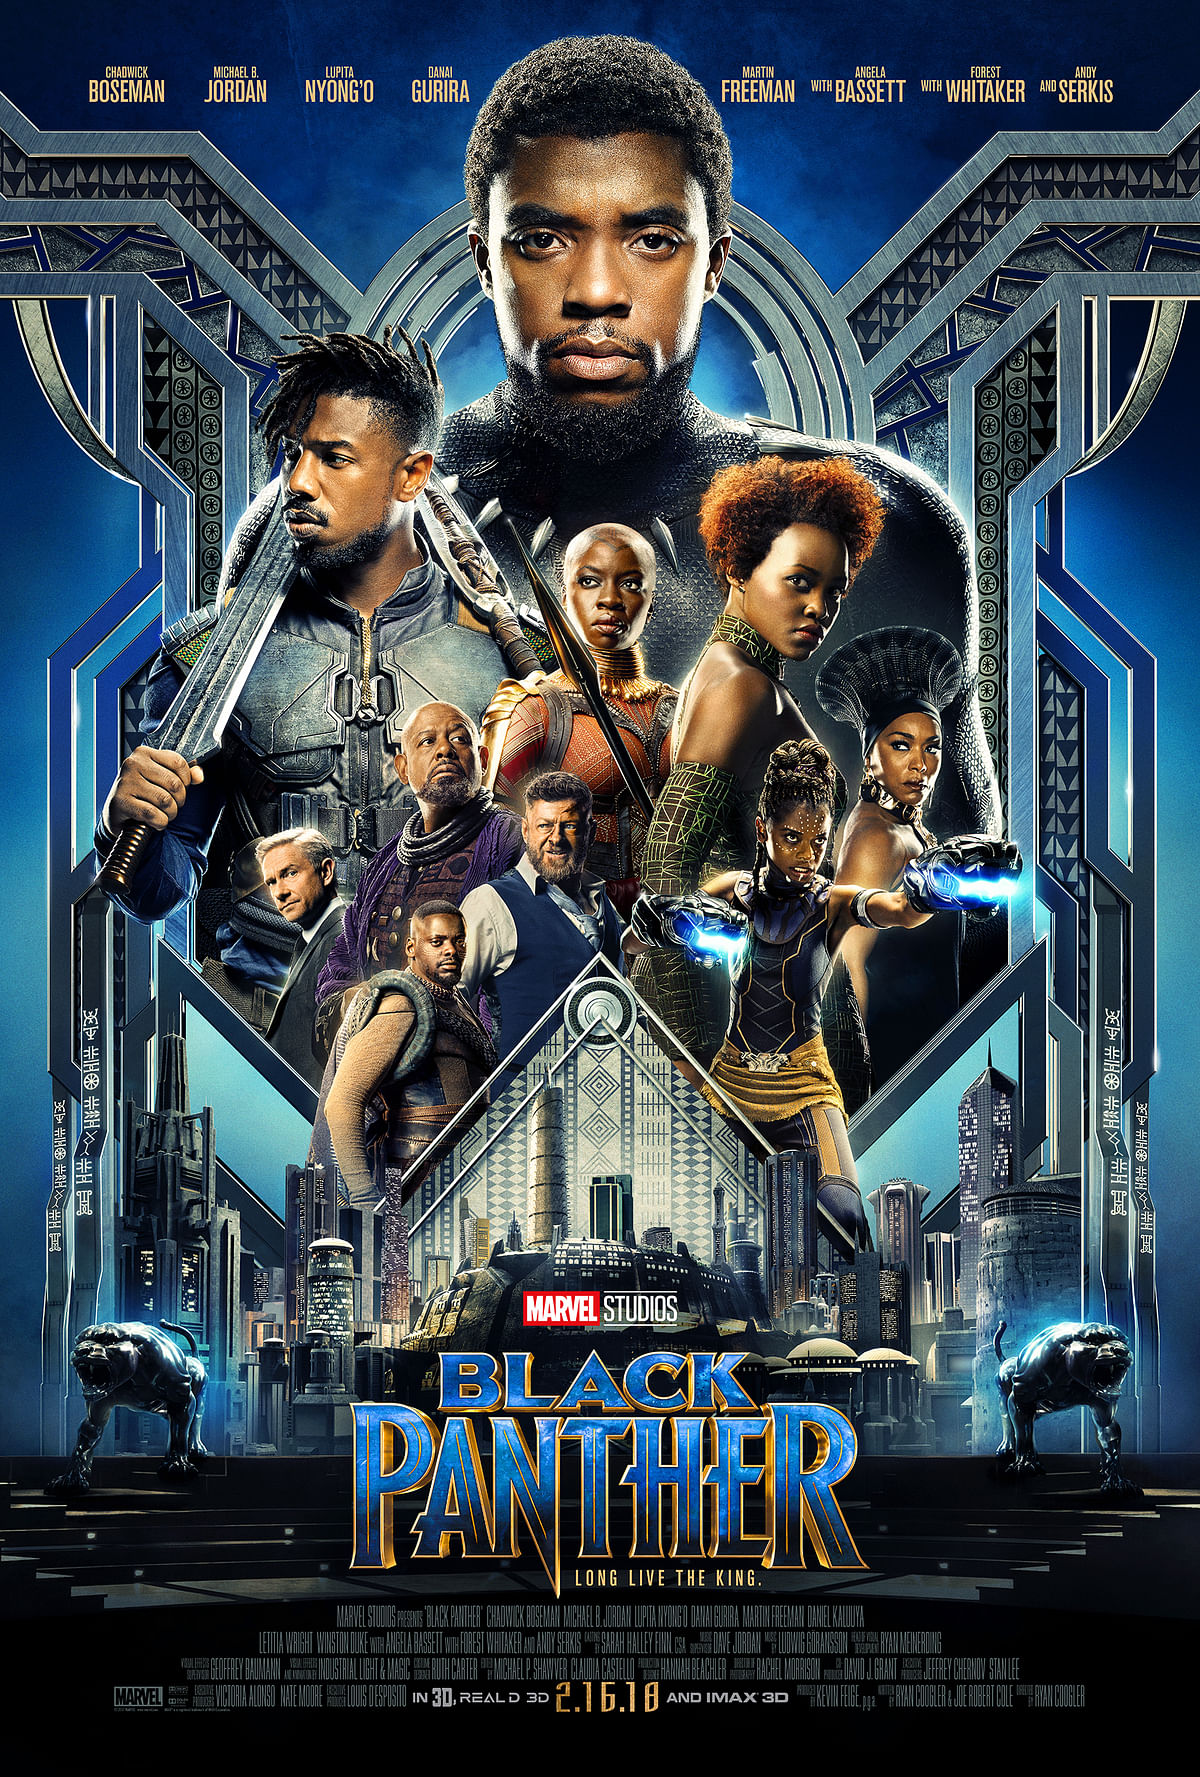 Our take on the latest Marvel superhero flick ‘Black Panther’.